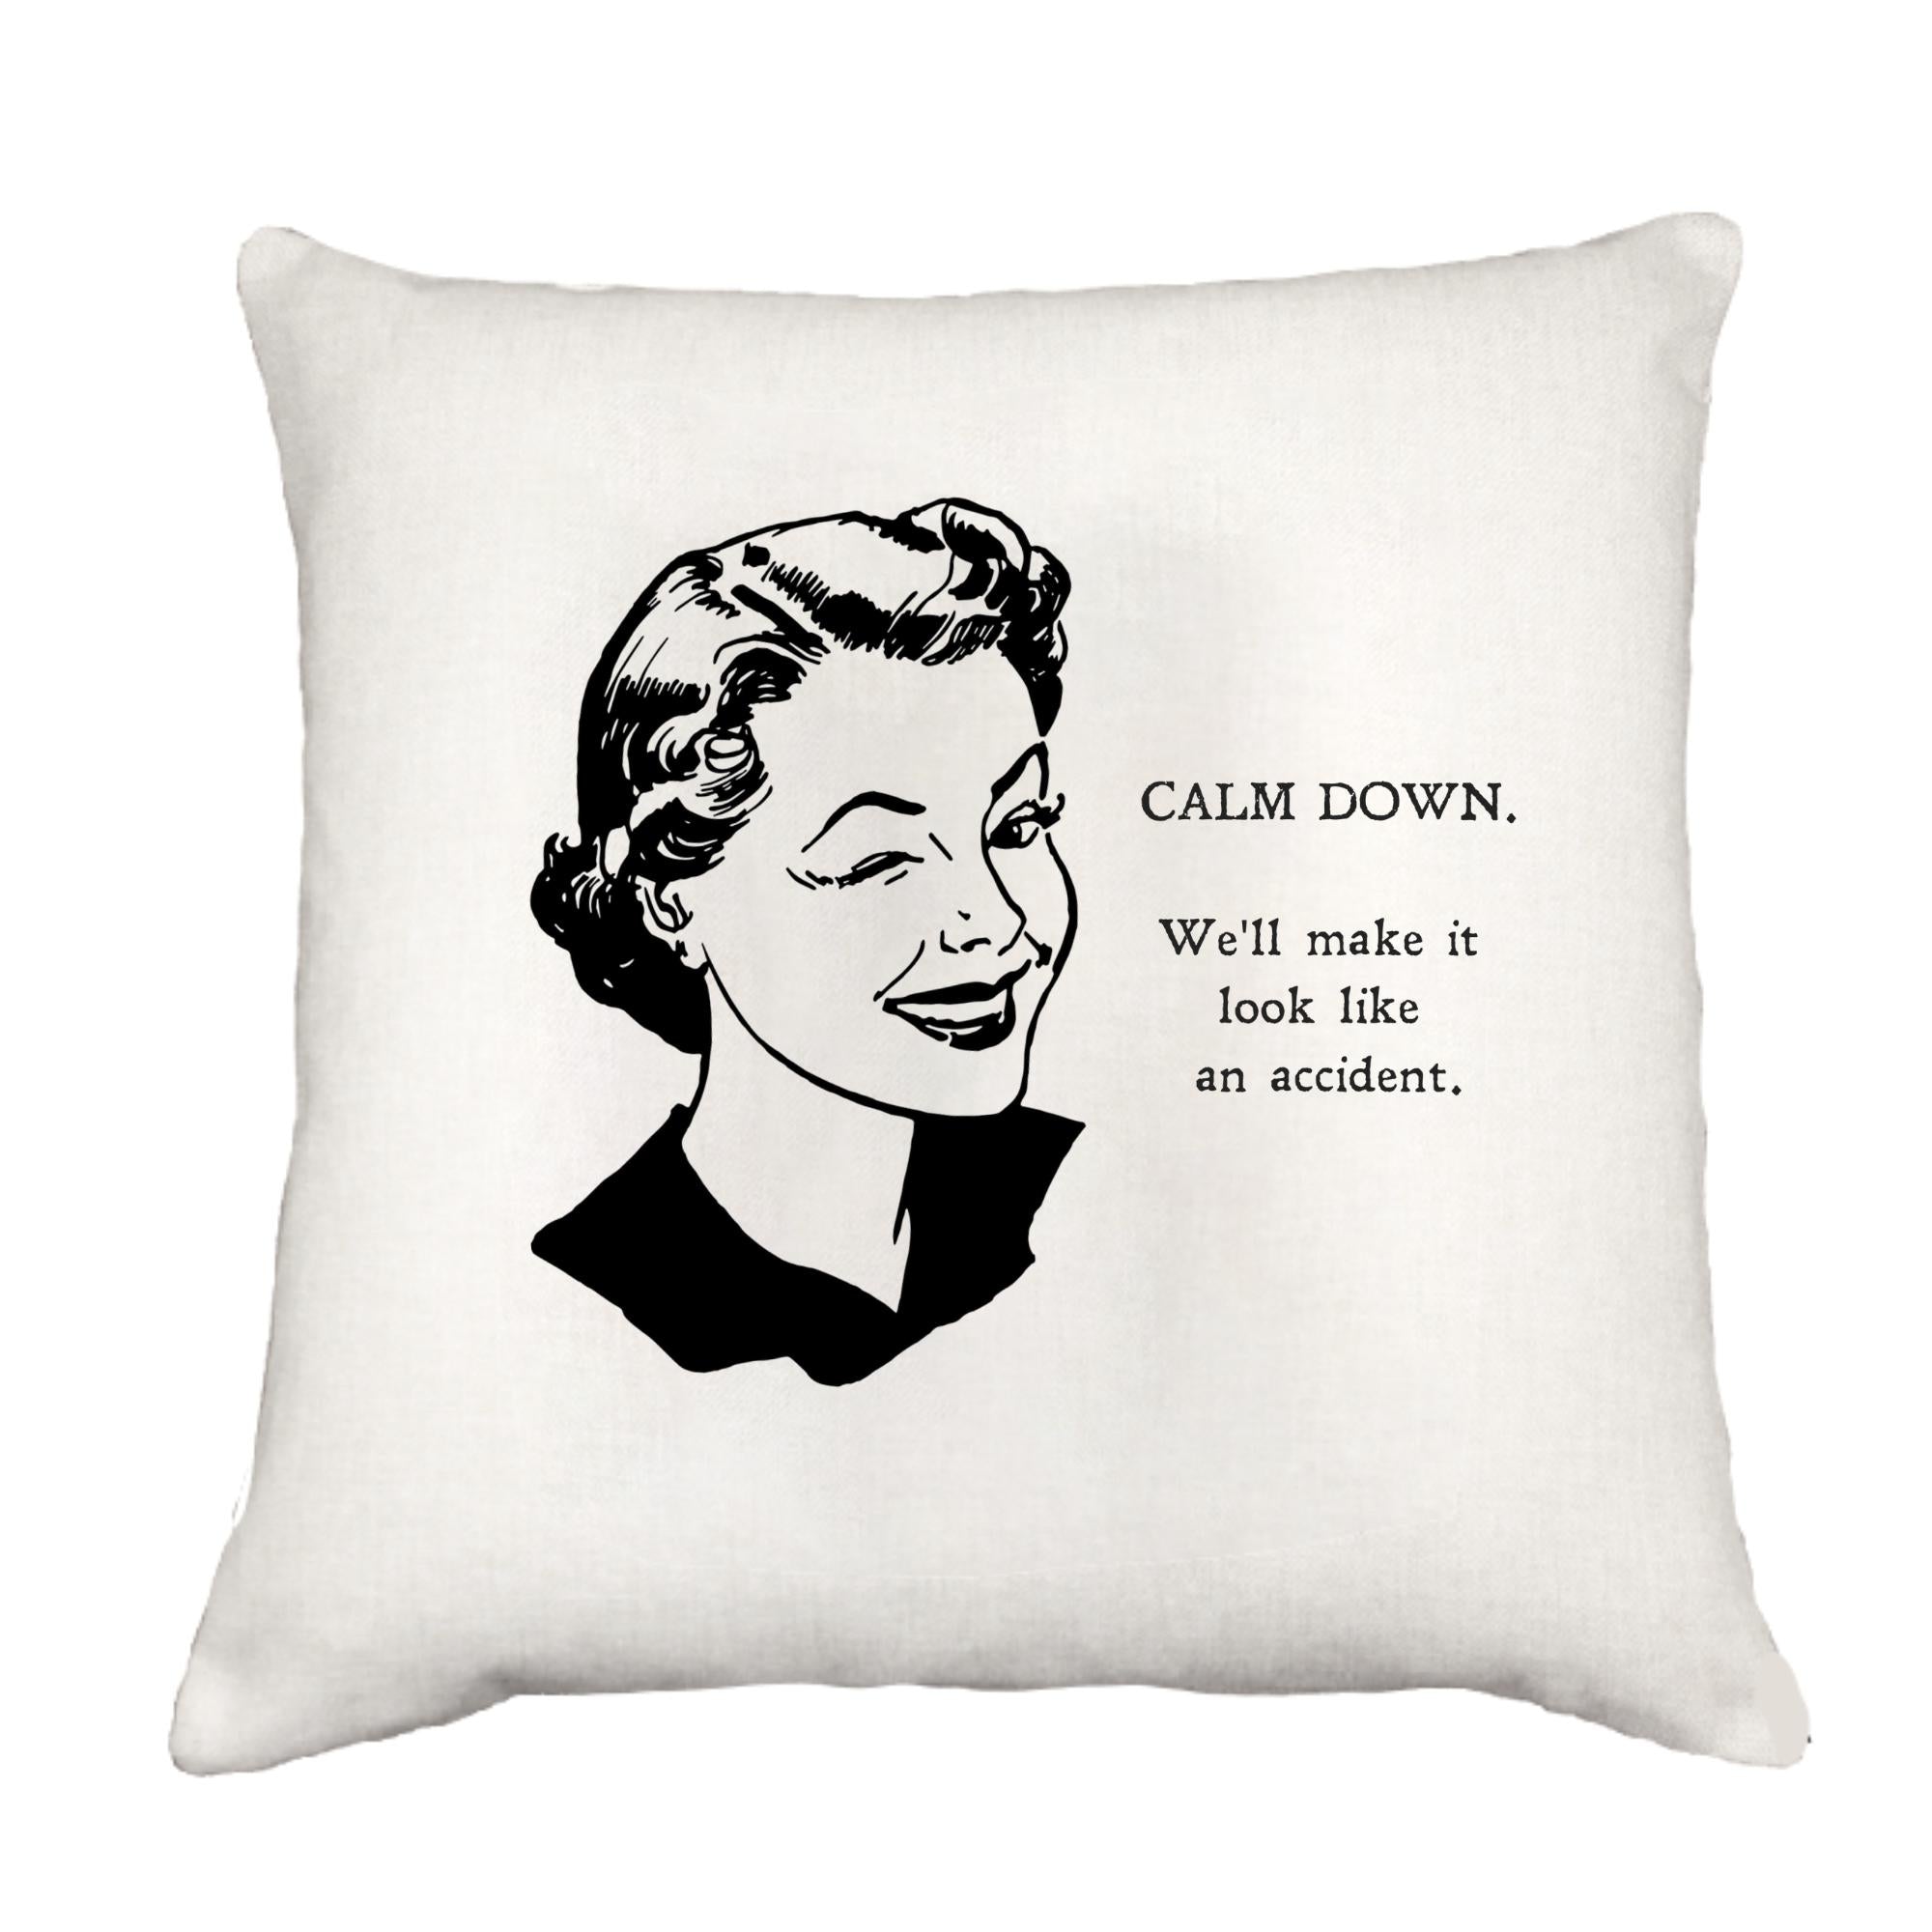 Calm Down Cottage Pillow Throw/Decorative Pillow - Southern Sisters